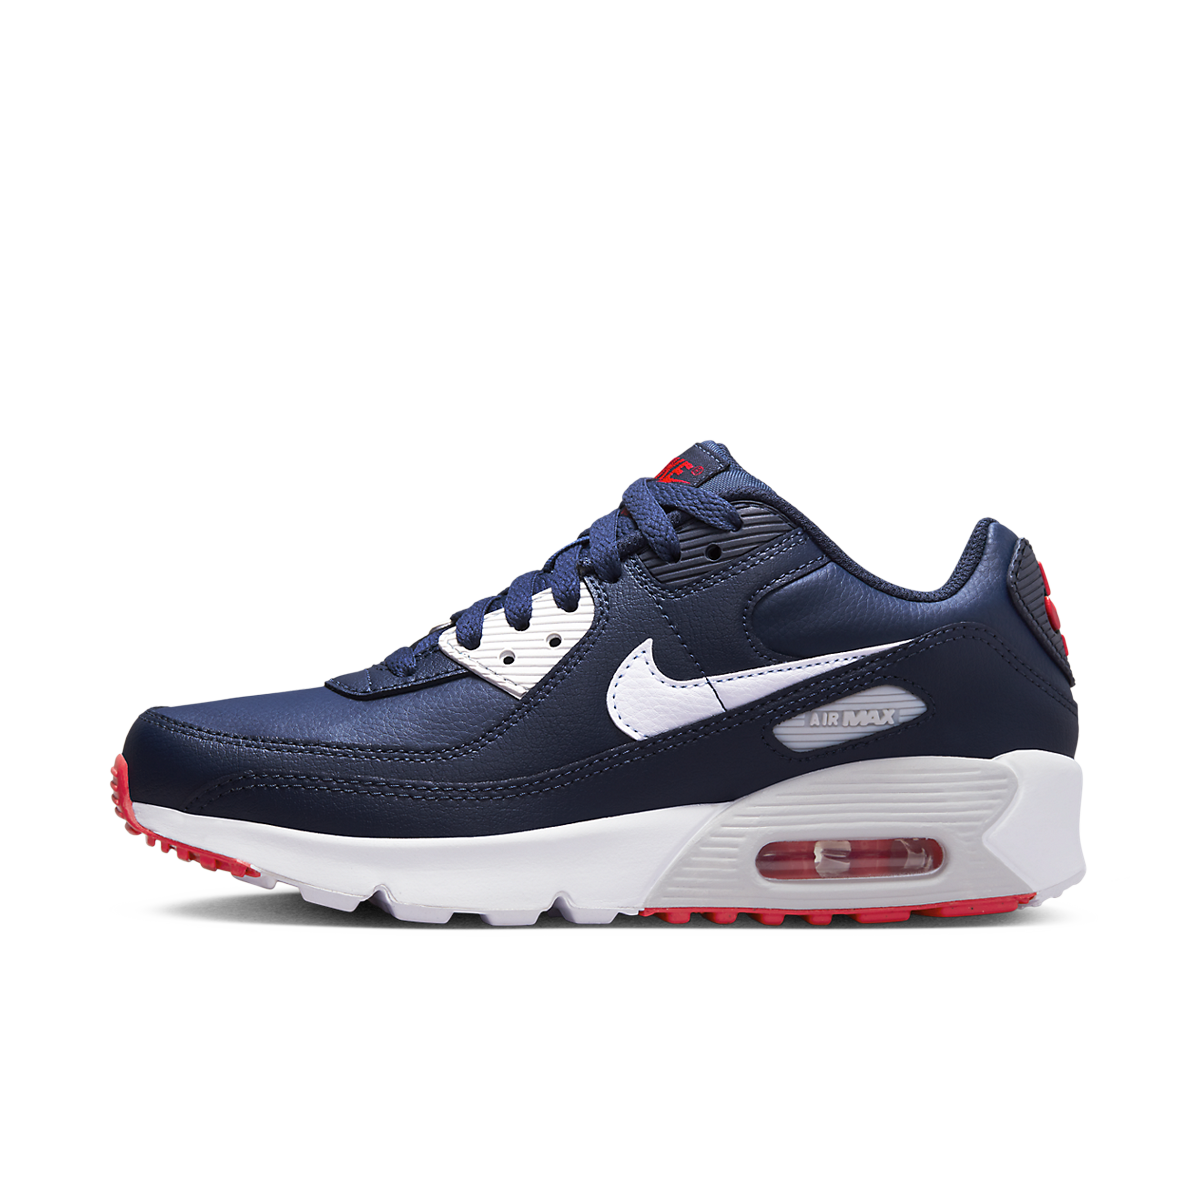 Air Max 90 Leather "Obsidian Track Red" GS